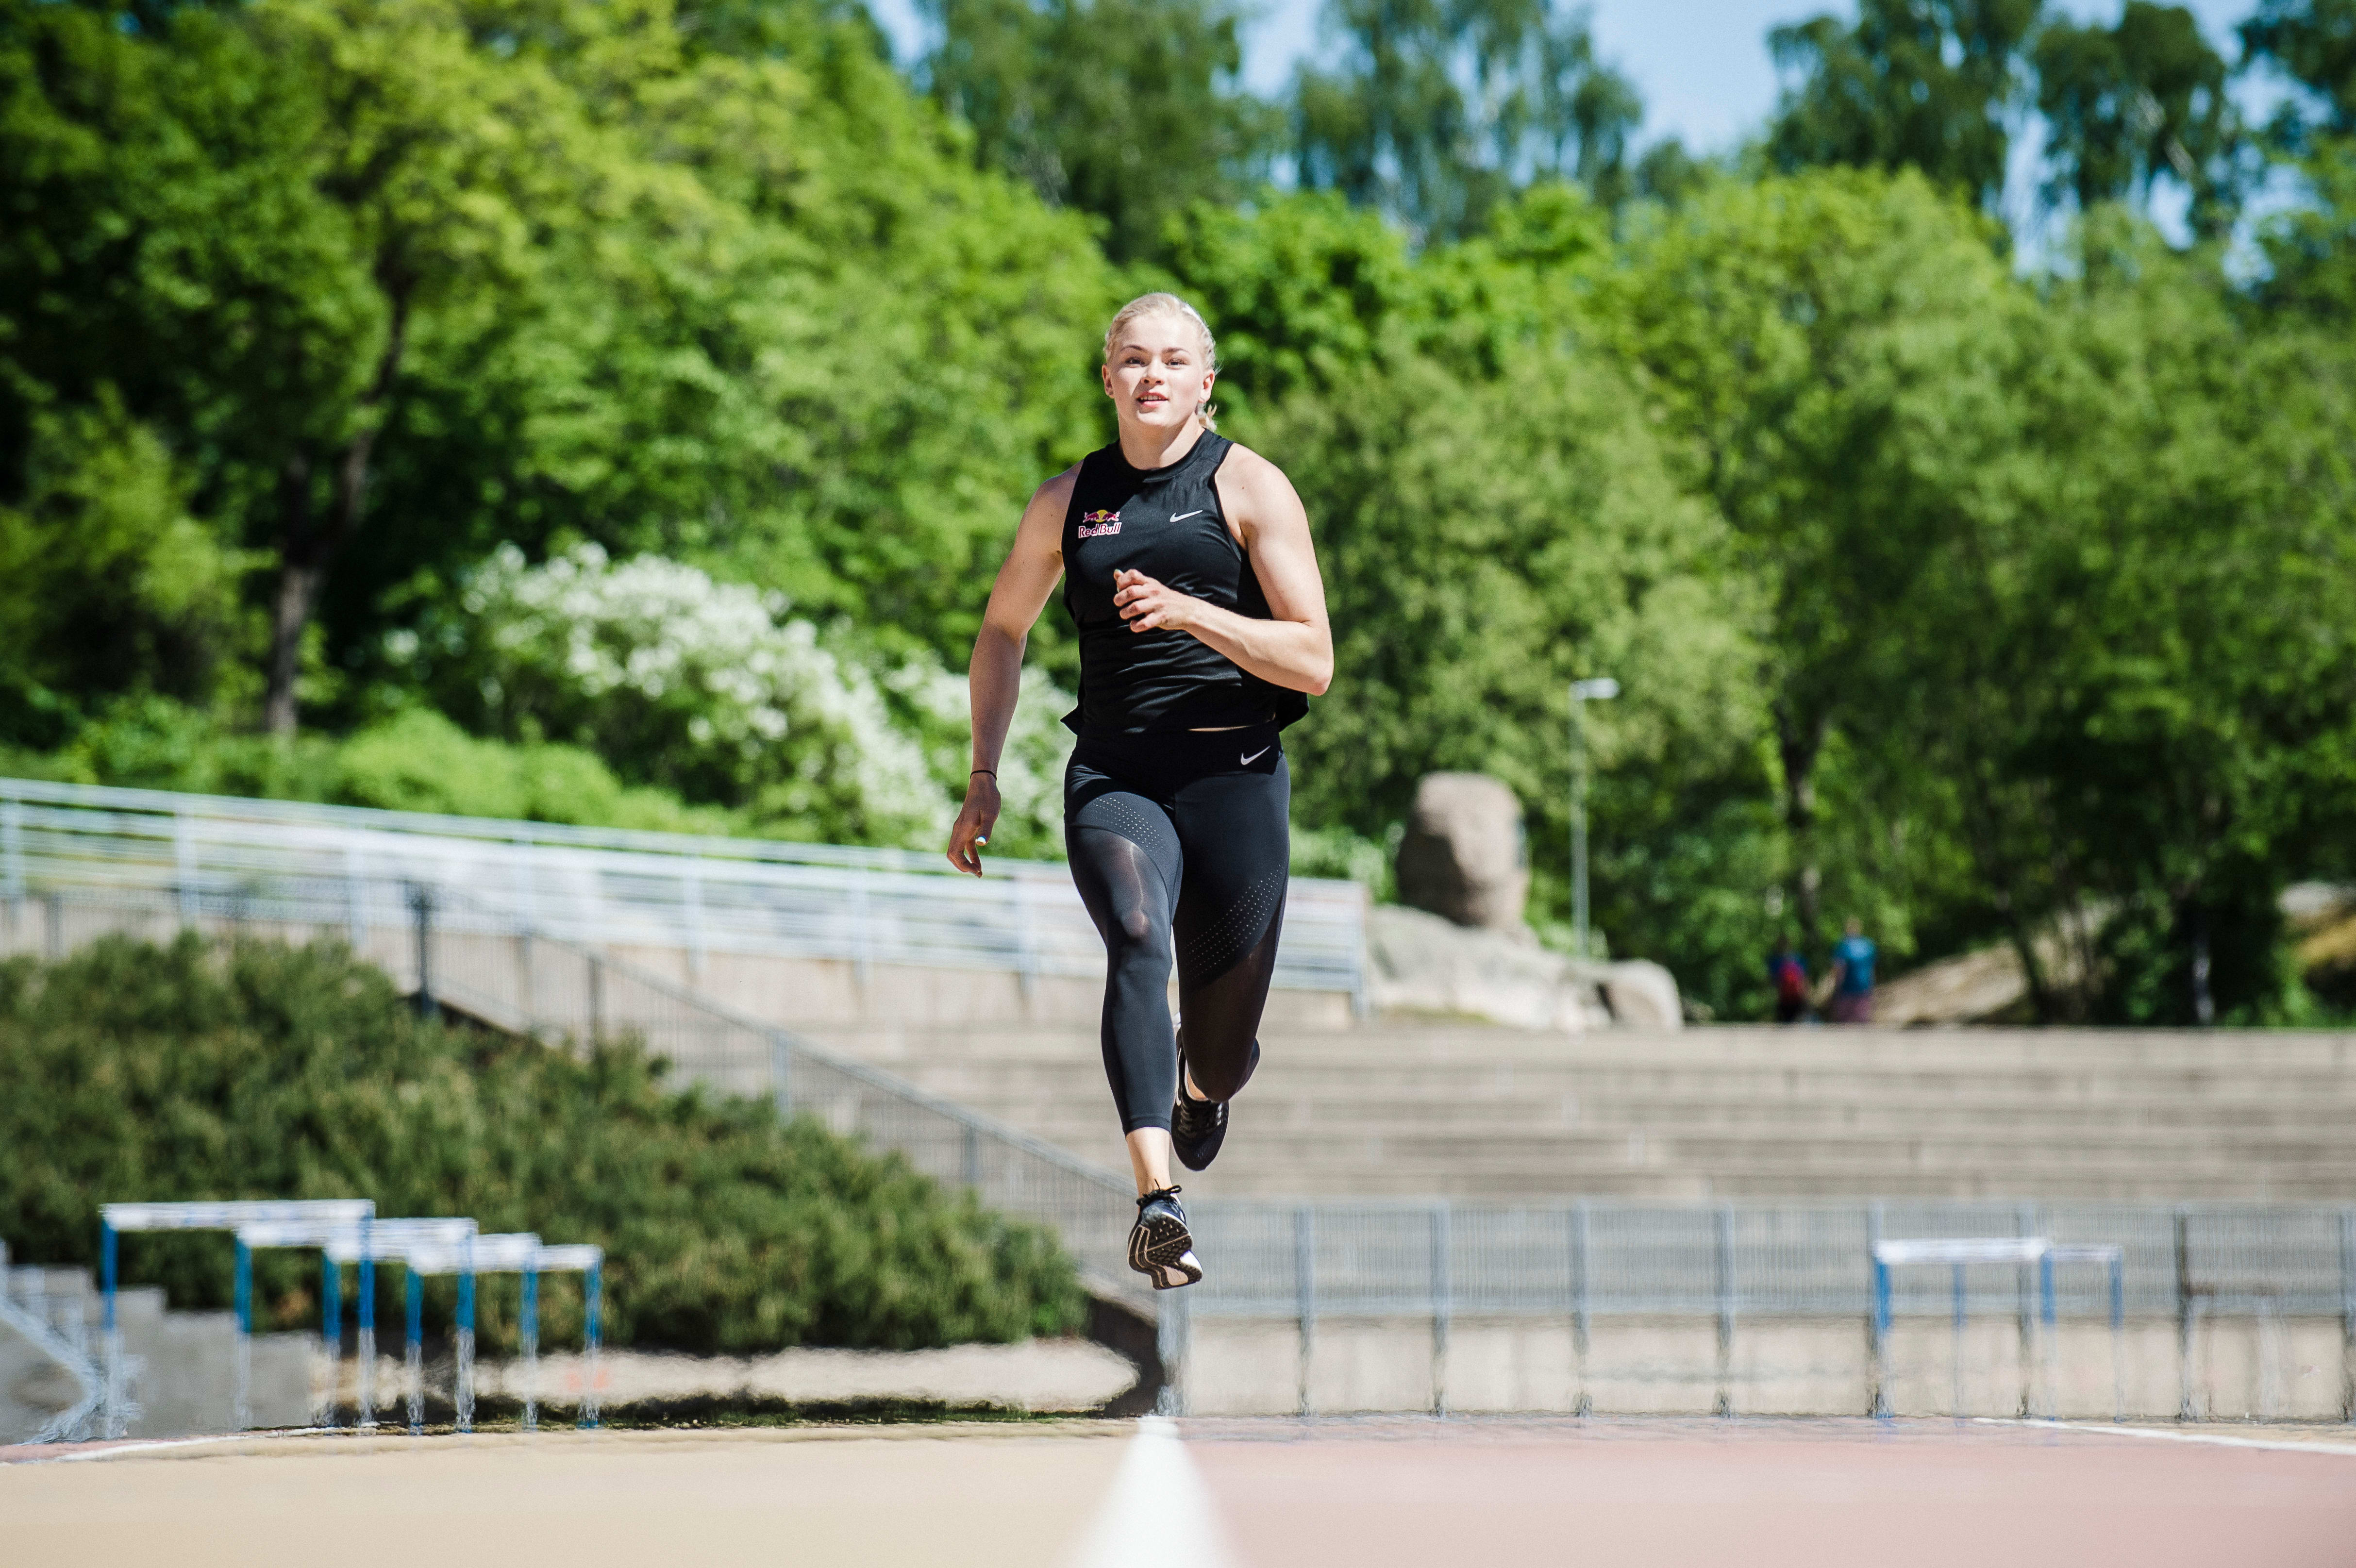 2 Running Ladder Workouts to Increase Your Speed – Runnin' for Sweets